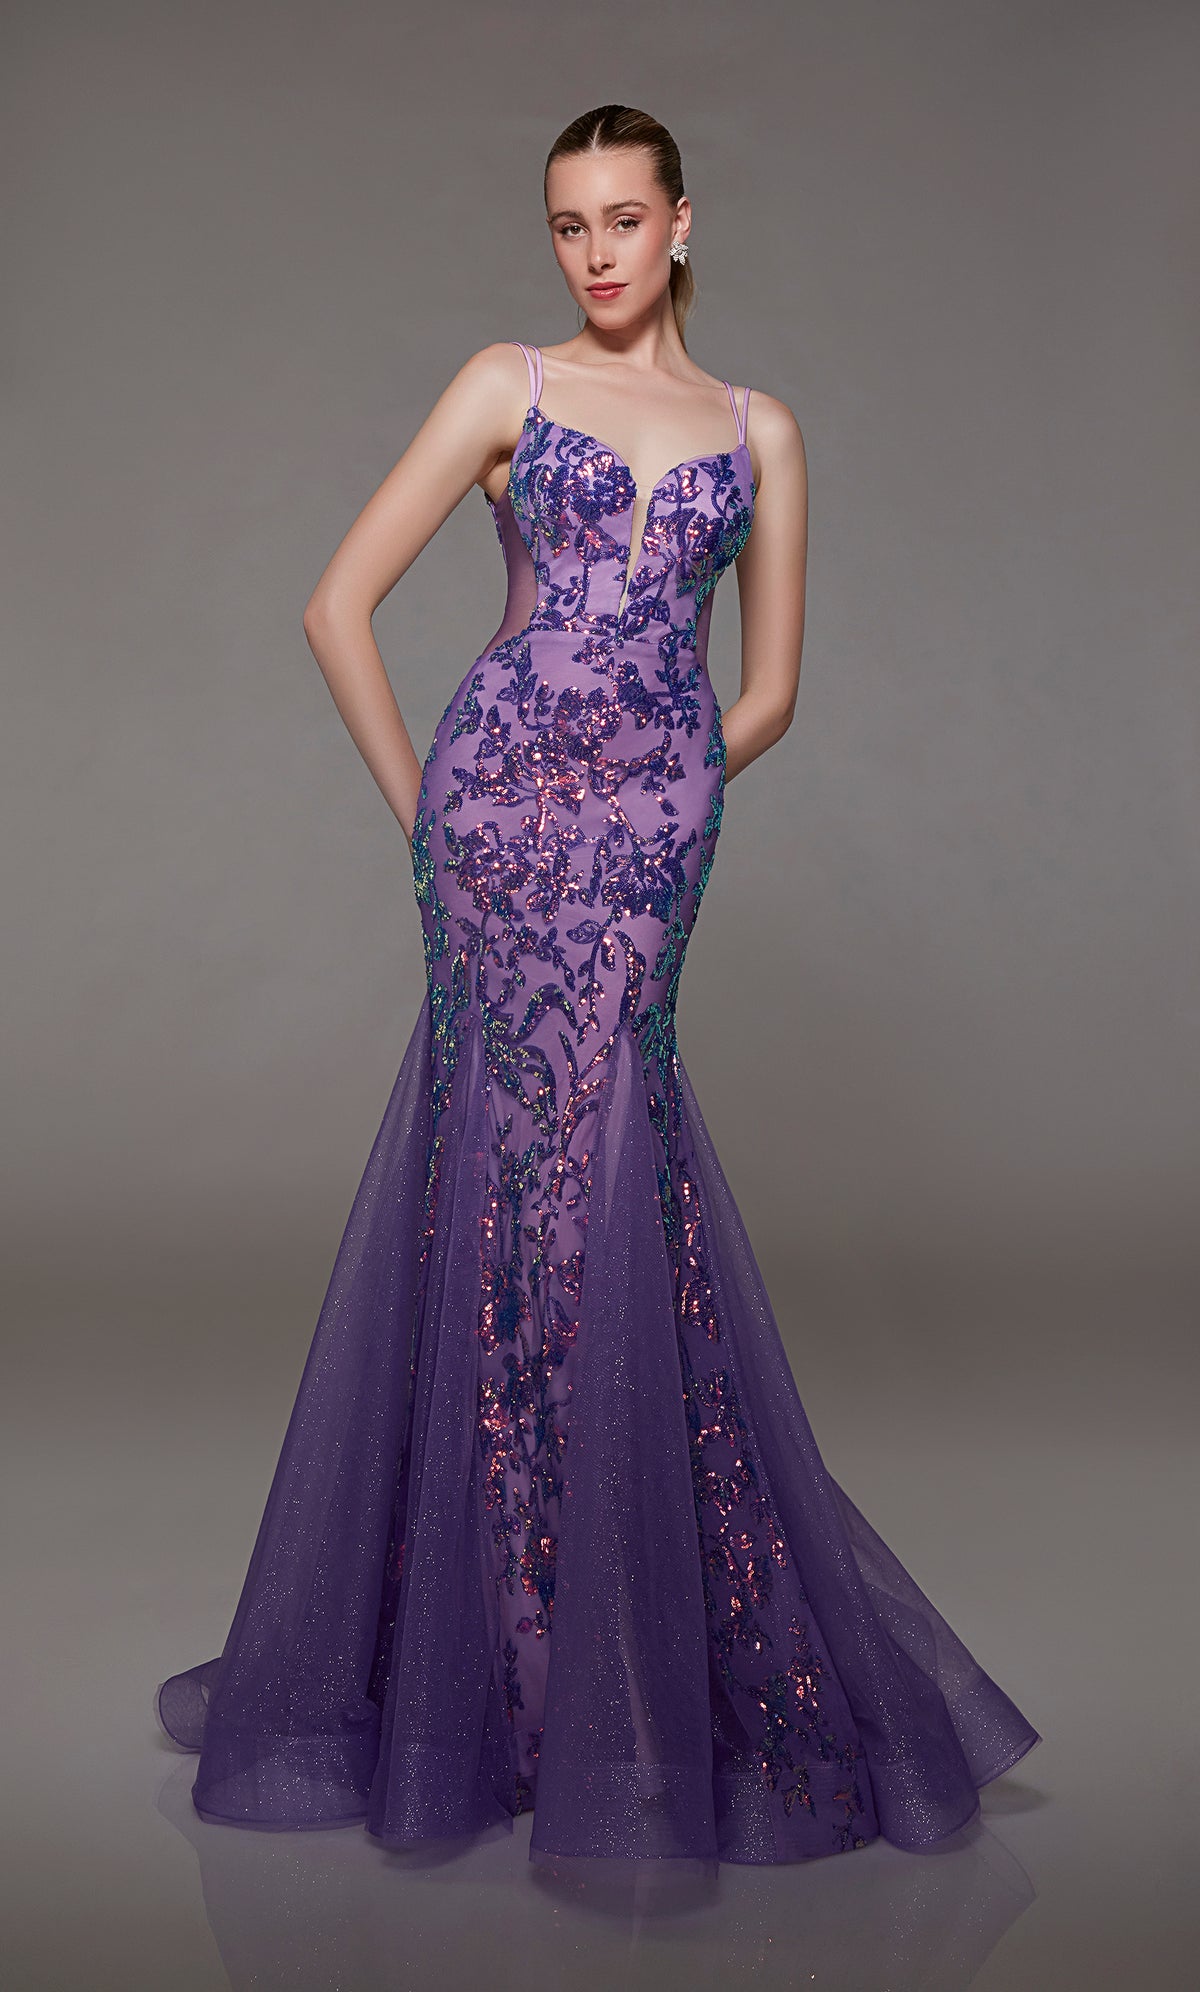 Purple-pink mermaid dress: Plunging neckline, sequin flowers, sheer side cutouts, and dual straps for an stunning and sophisticated look.